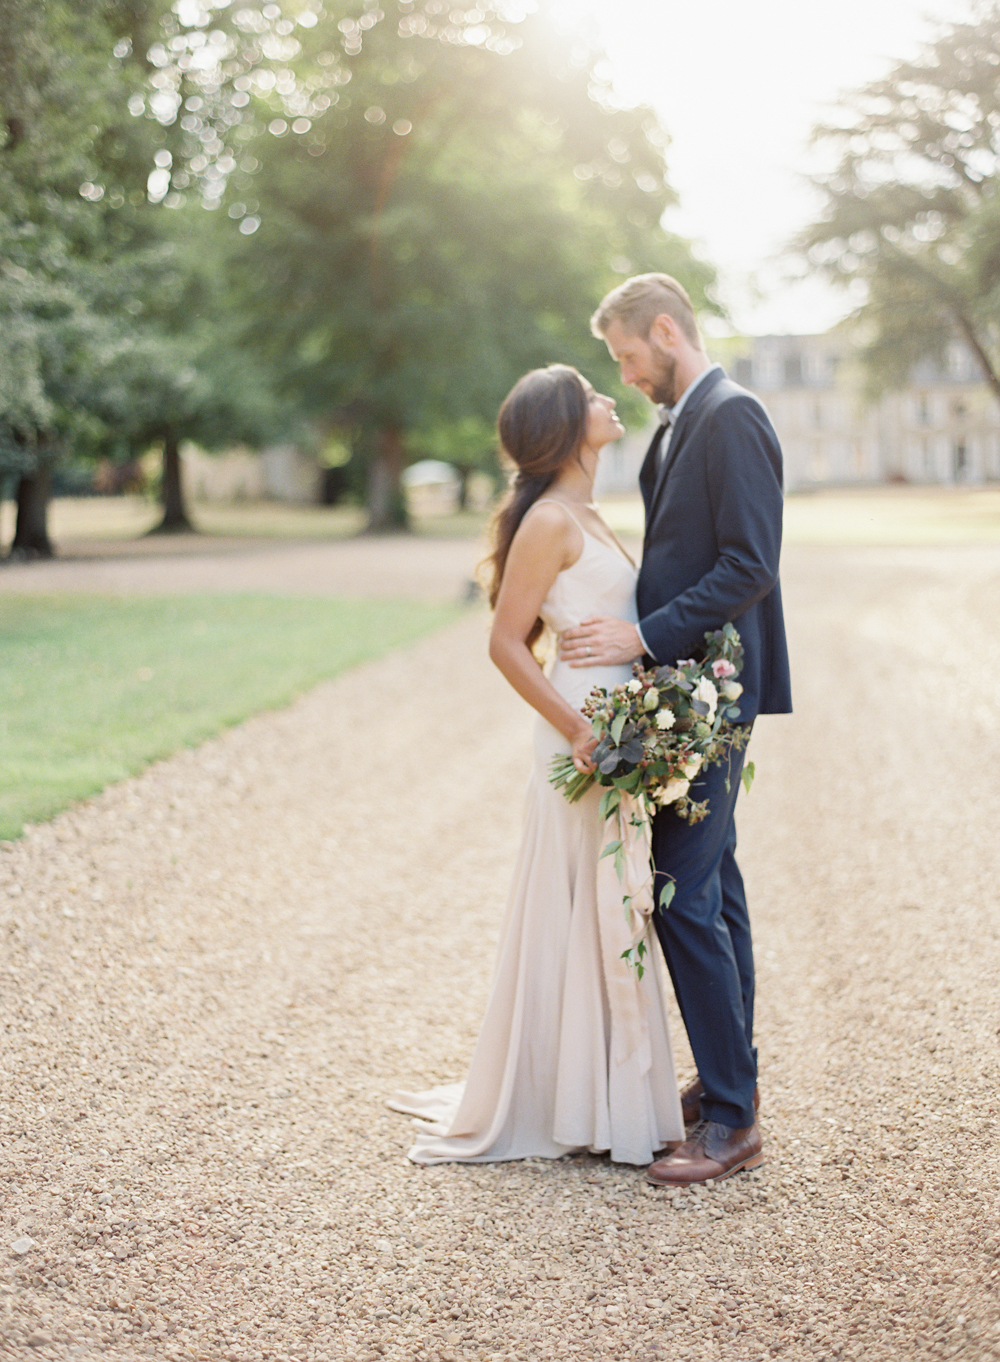  Vicki Grafton Photography Fine Art Film Destination Wedding Photographer | Intimate French Chateau Wedding |&nbsp;Fine art film French château couples session during The Artist Holiday |&nbsp;Styling by  Ginny Au &nbsp;| Florals  Amy Merrick &nbsp;|